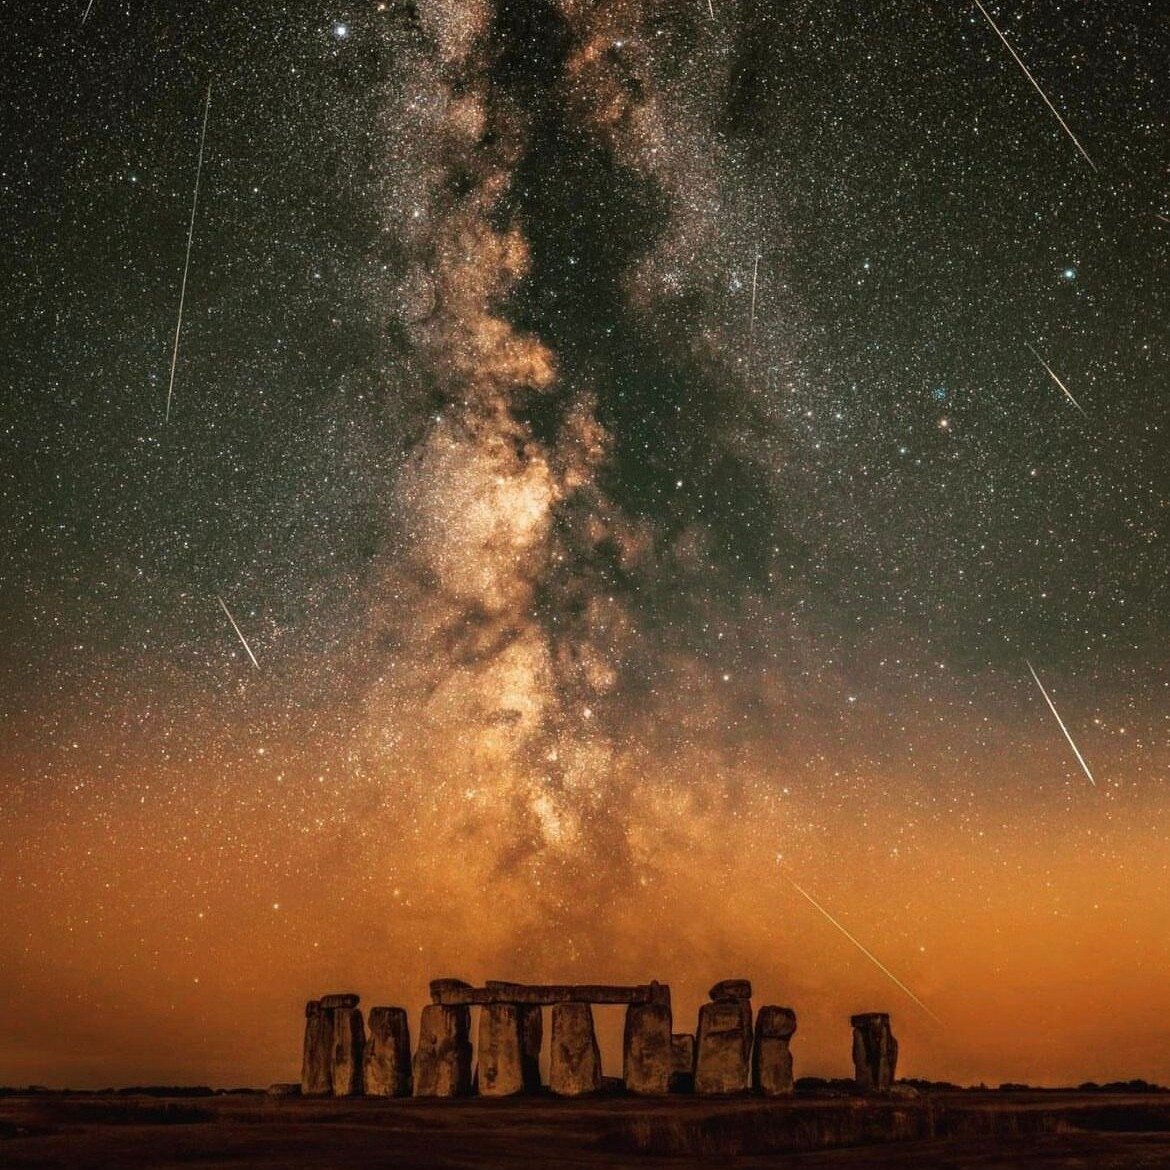 EARTH DAY | It's World Earth Day today and what better way to reflect on our place in the universe than to look to the stars. Tonight happens to be the prime moment to view the Lyrid meteor shower; So named after the constellation of Lyra. Bordering 